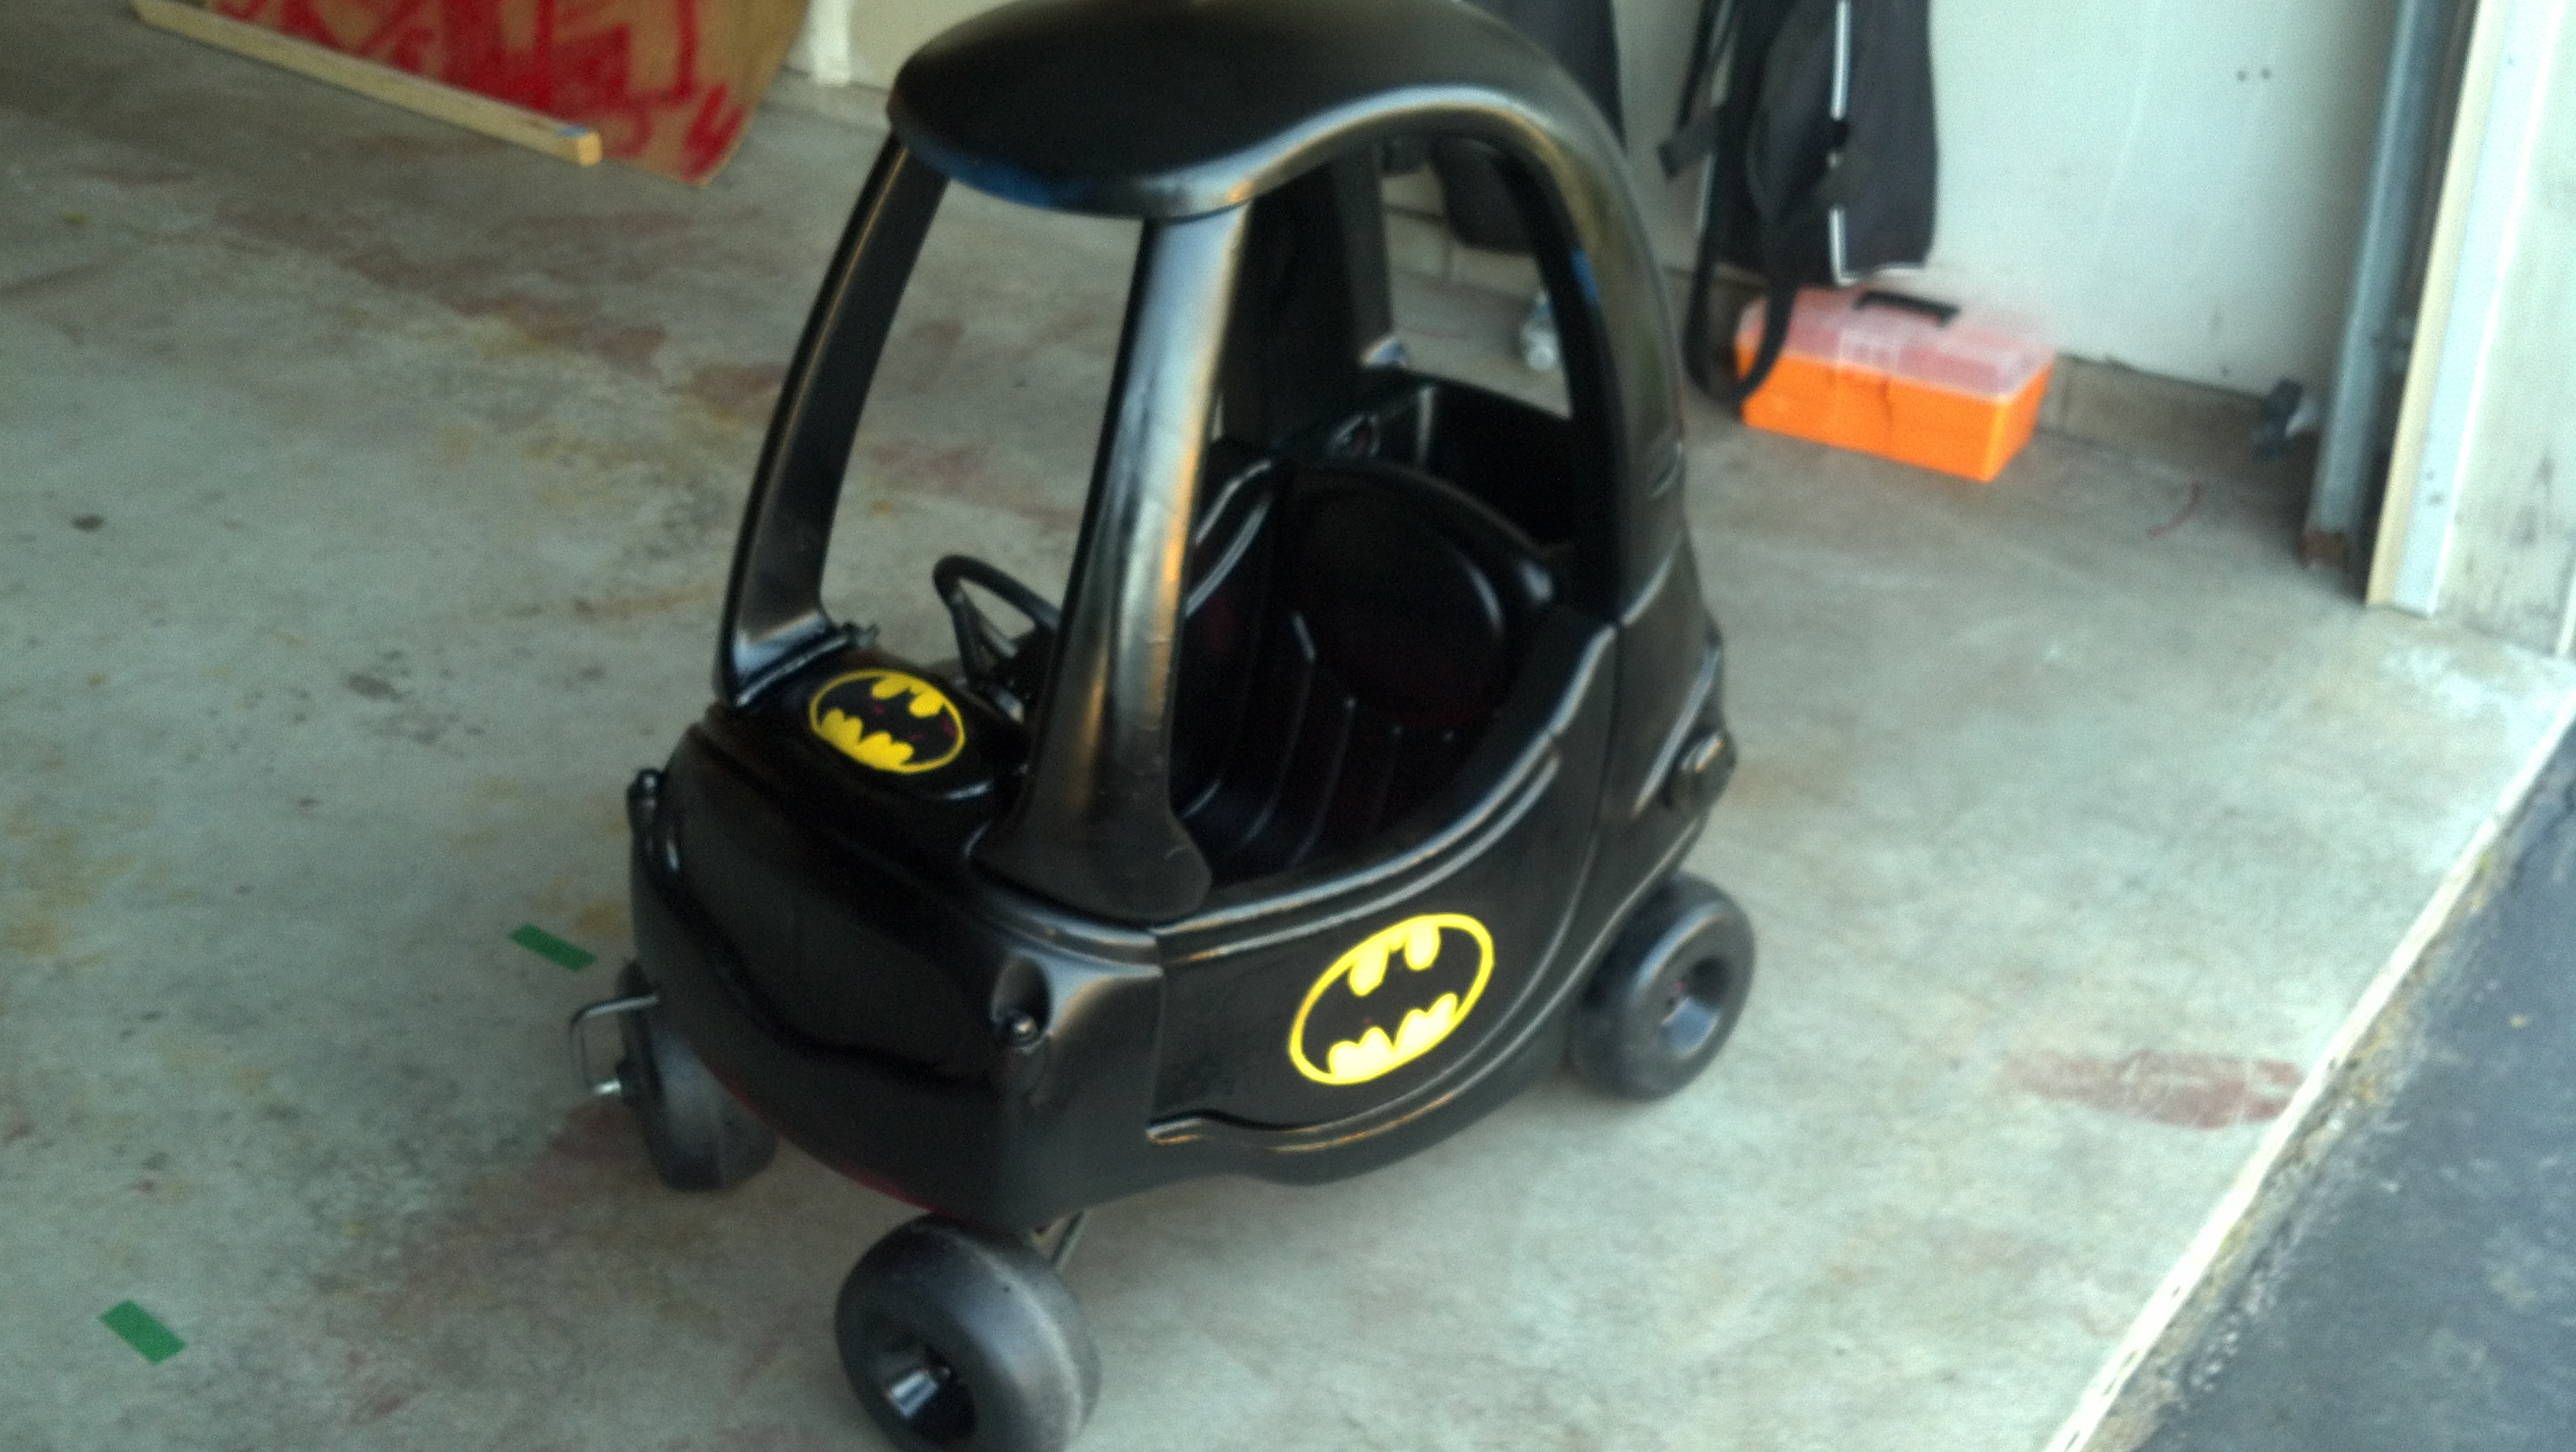 banaan oosters gesprek John Bernier on Twitter: "A little spray paint and tape, and magic, its a cozy  coupe Batman car! My 4yo will love it... http://t.co/hu2DQw6y" / Twitter